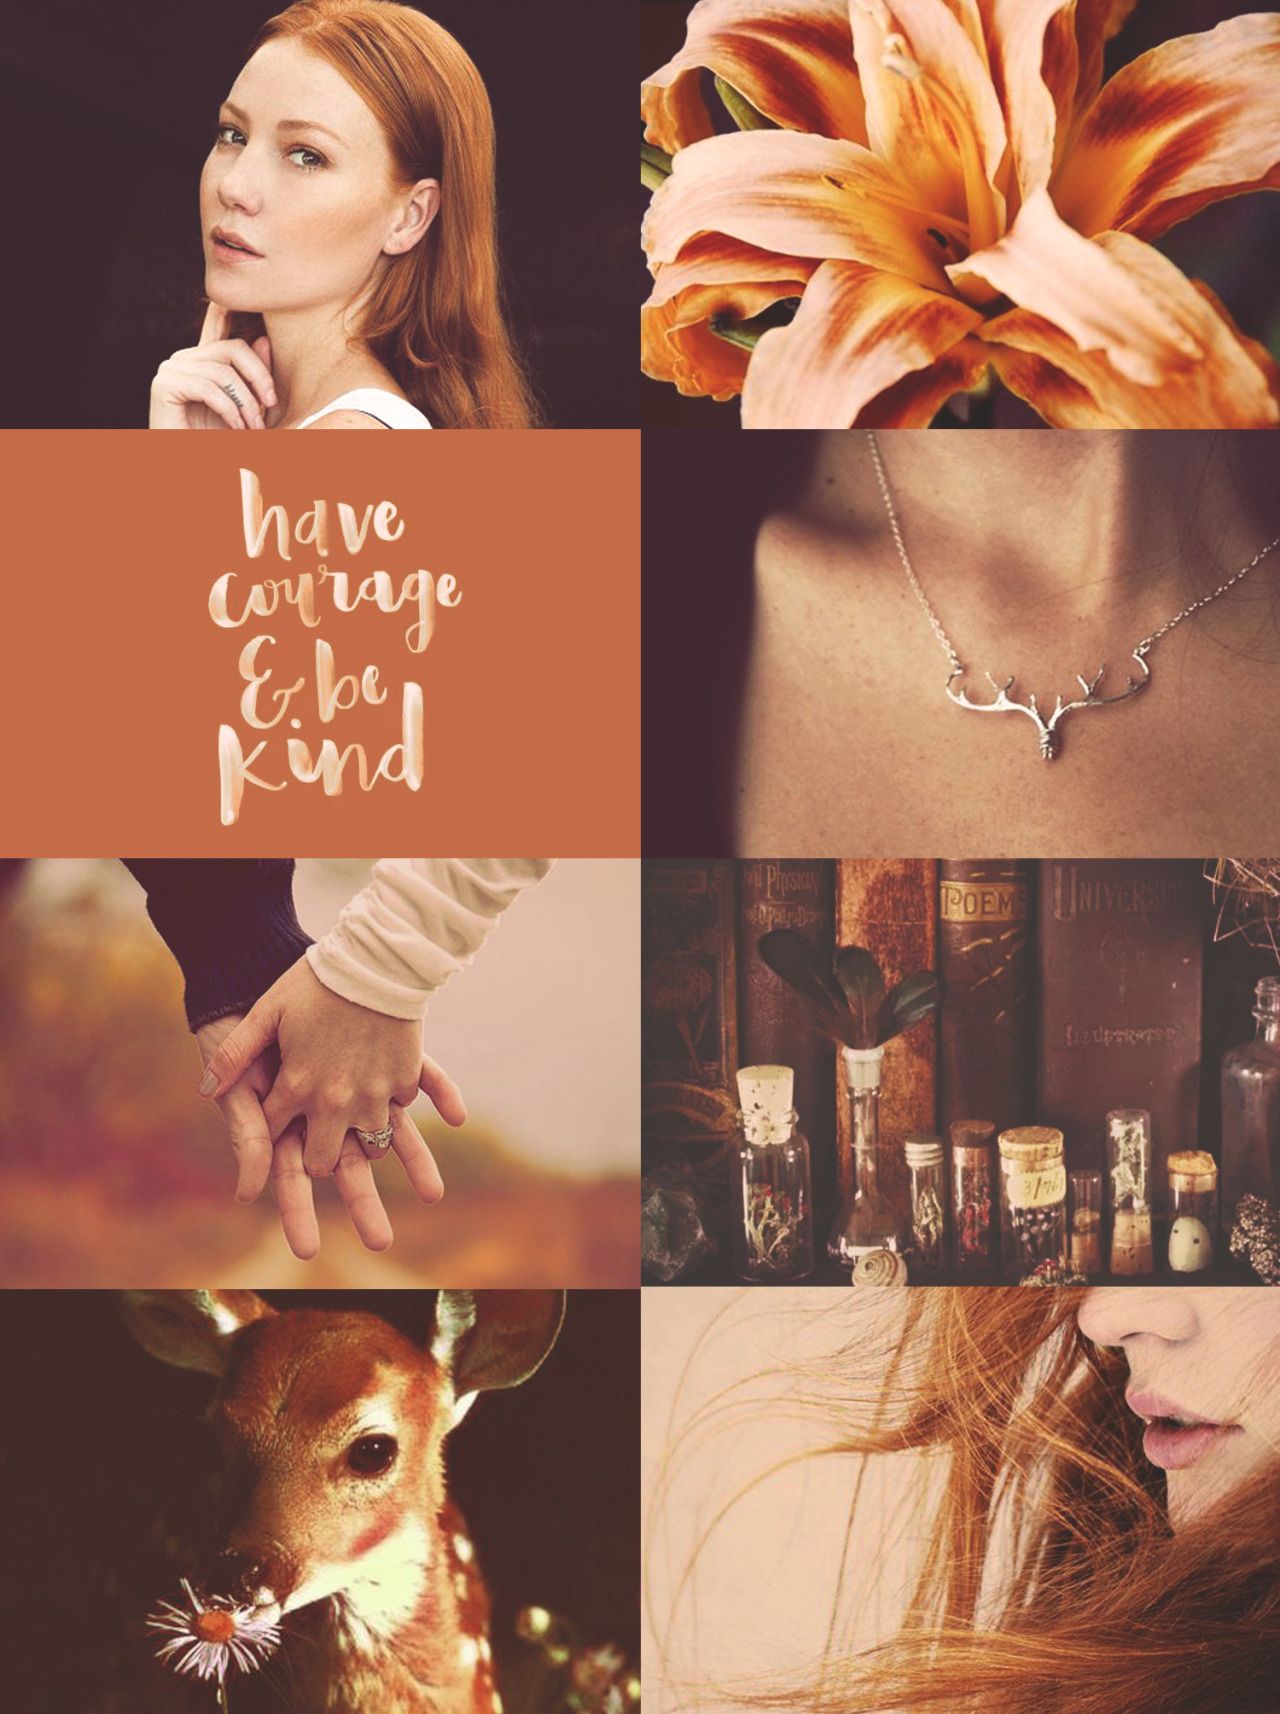 Lily evans lily evans potter lily potter harry potter aesthetic